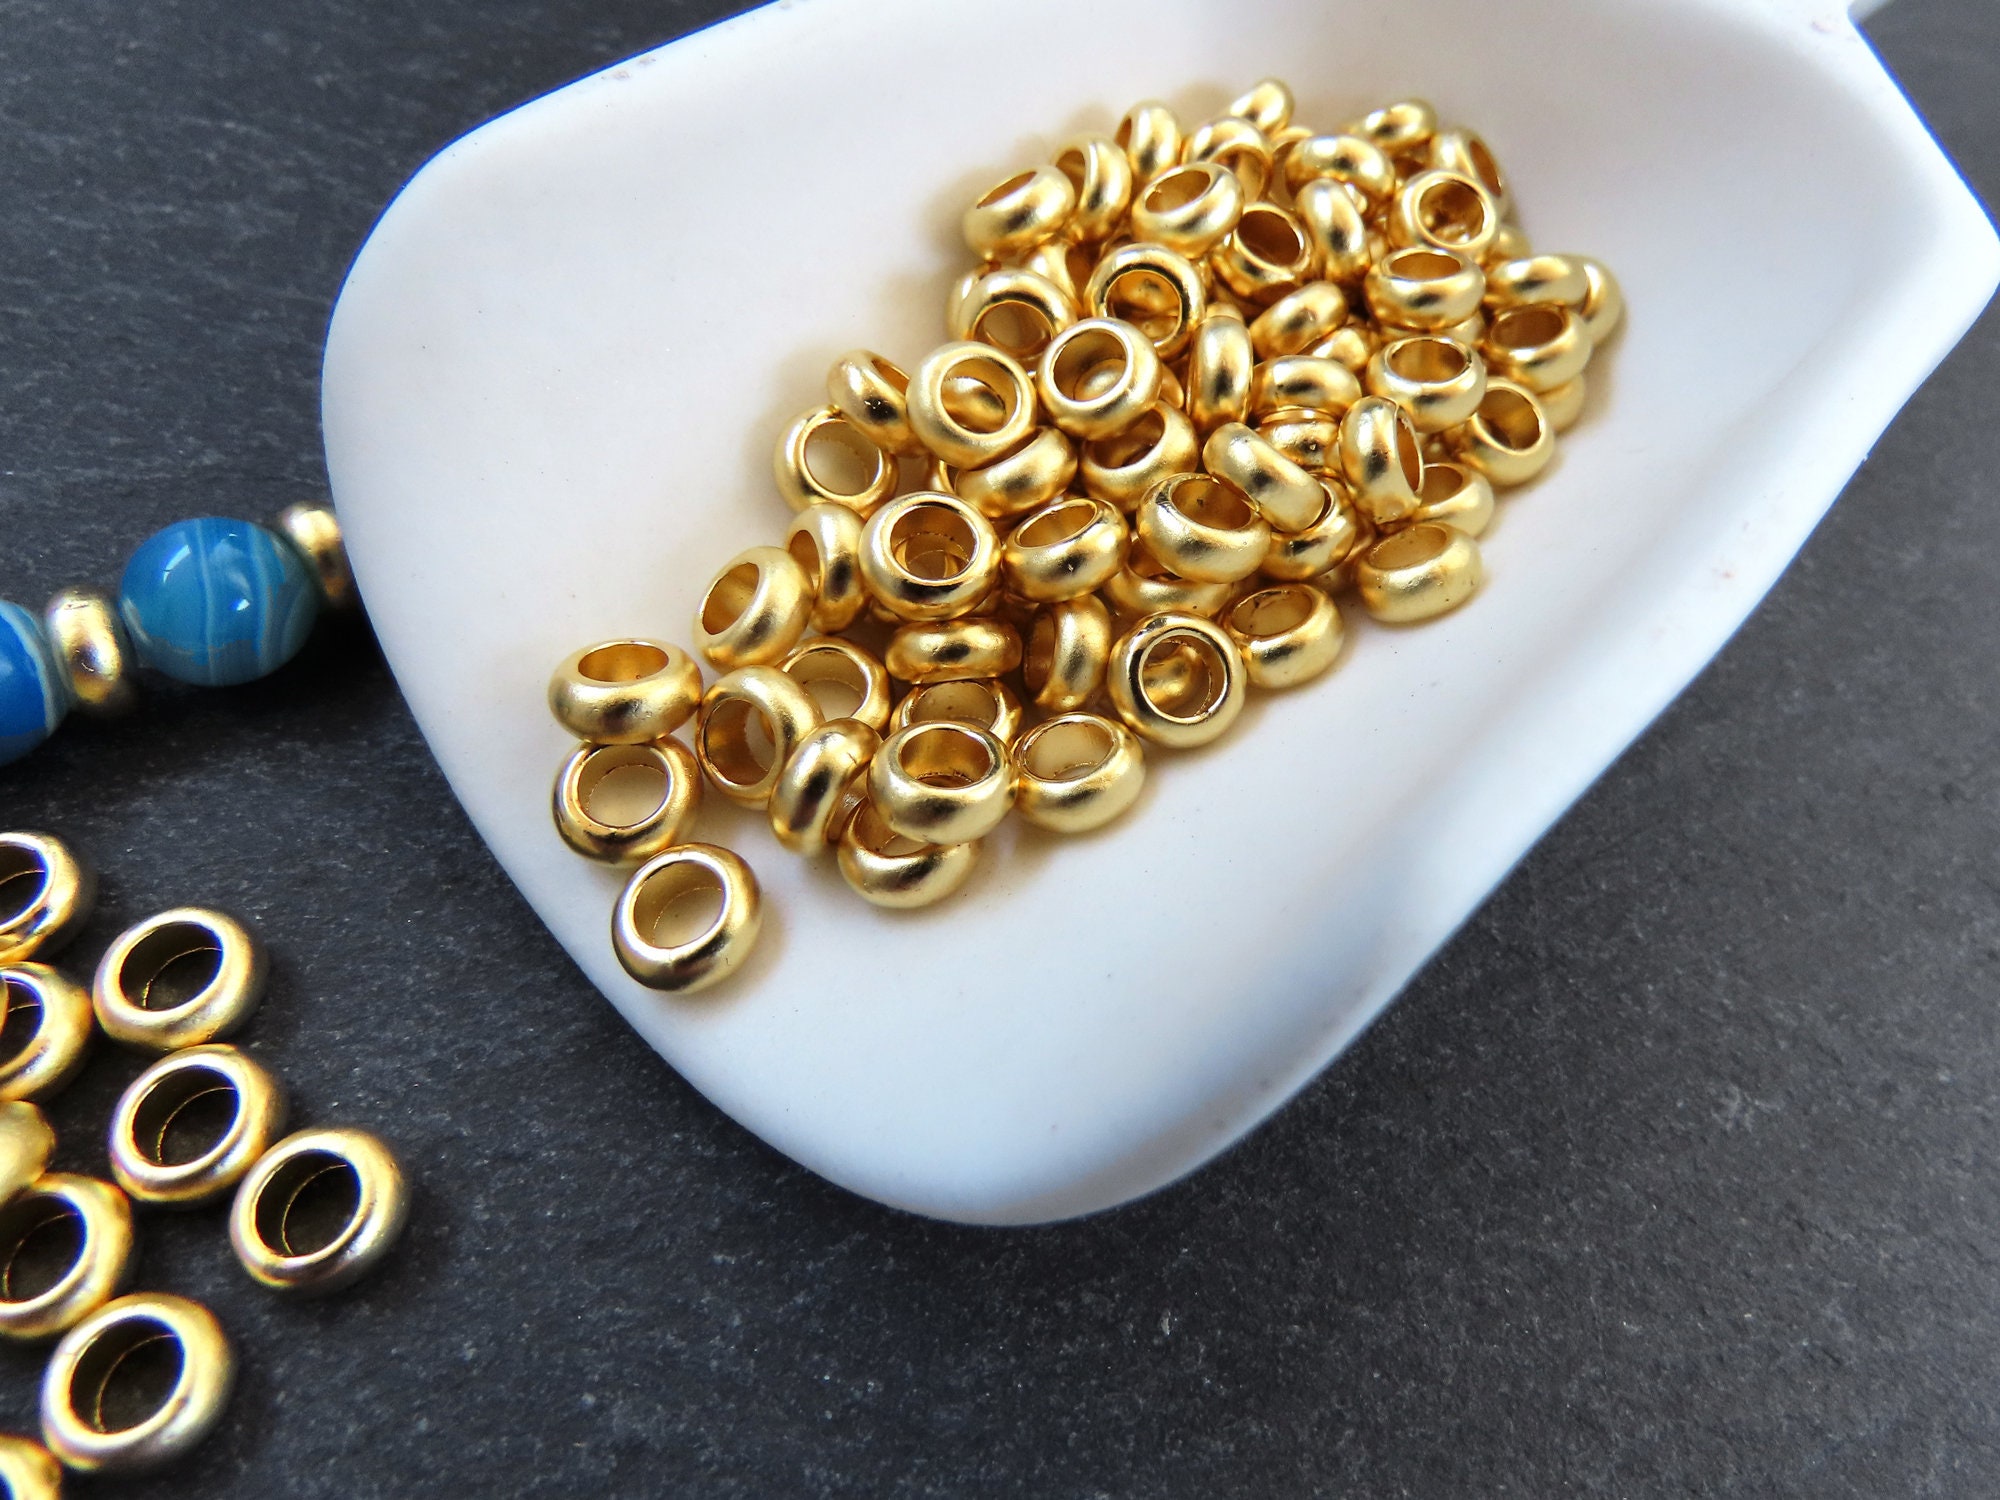 6mm Heishi Washer Bead Spacers, Mykonos Greek Beads, Round Metal Beads,  3.2mm Hole, Jewelry Making Supply, 22k Matte Gold Plated, 15pc 